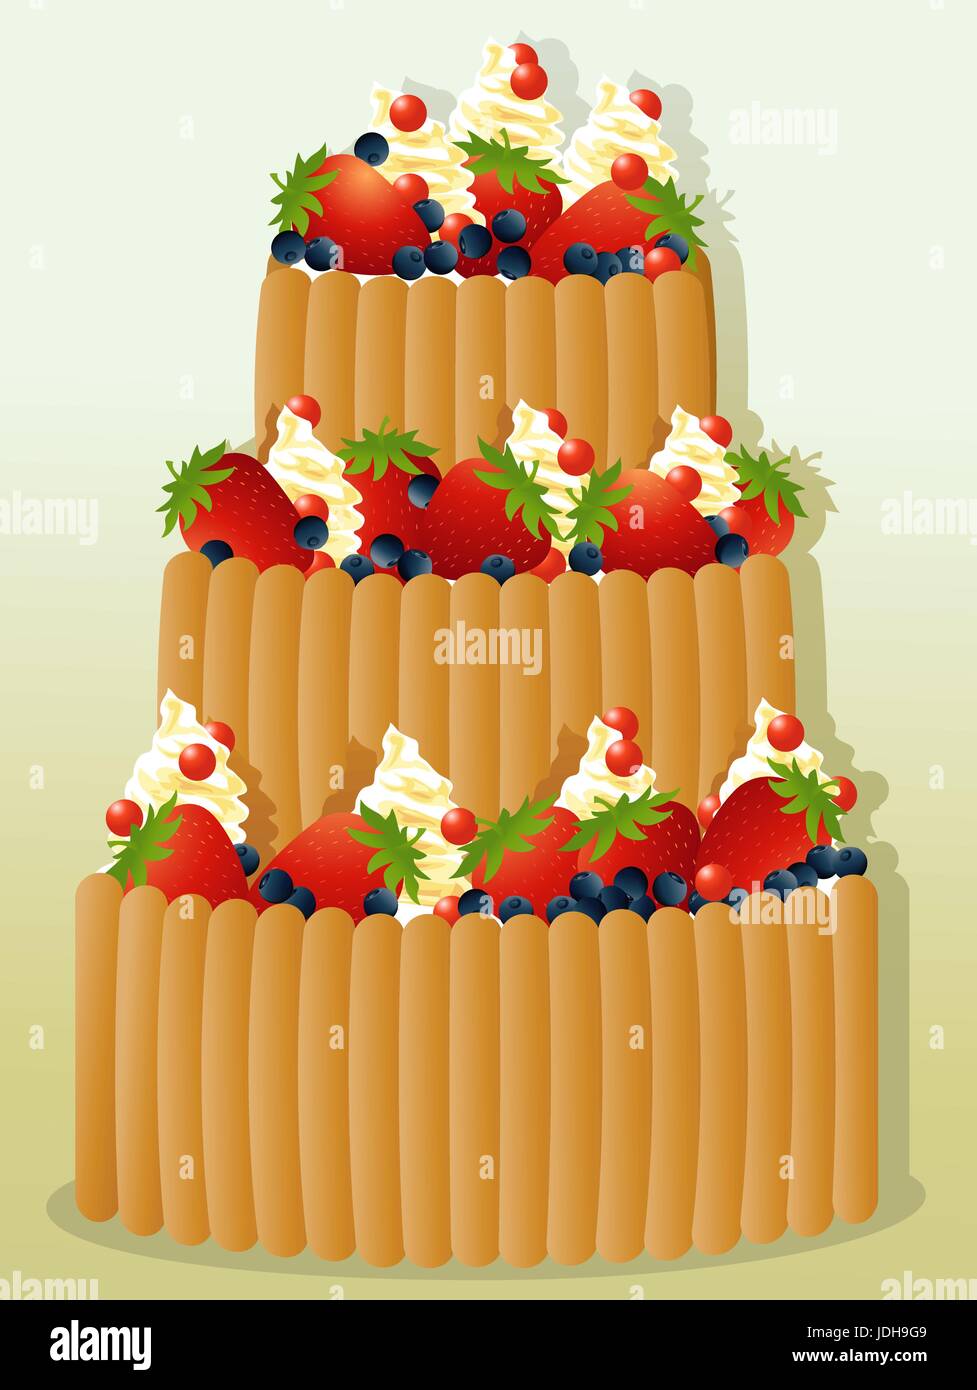 A VERY Big Birthday Cake with Summer Berries! British Sugar & Street Party  Recipes